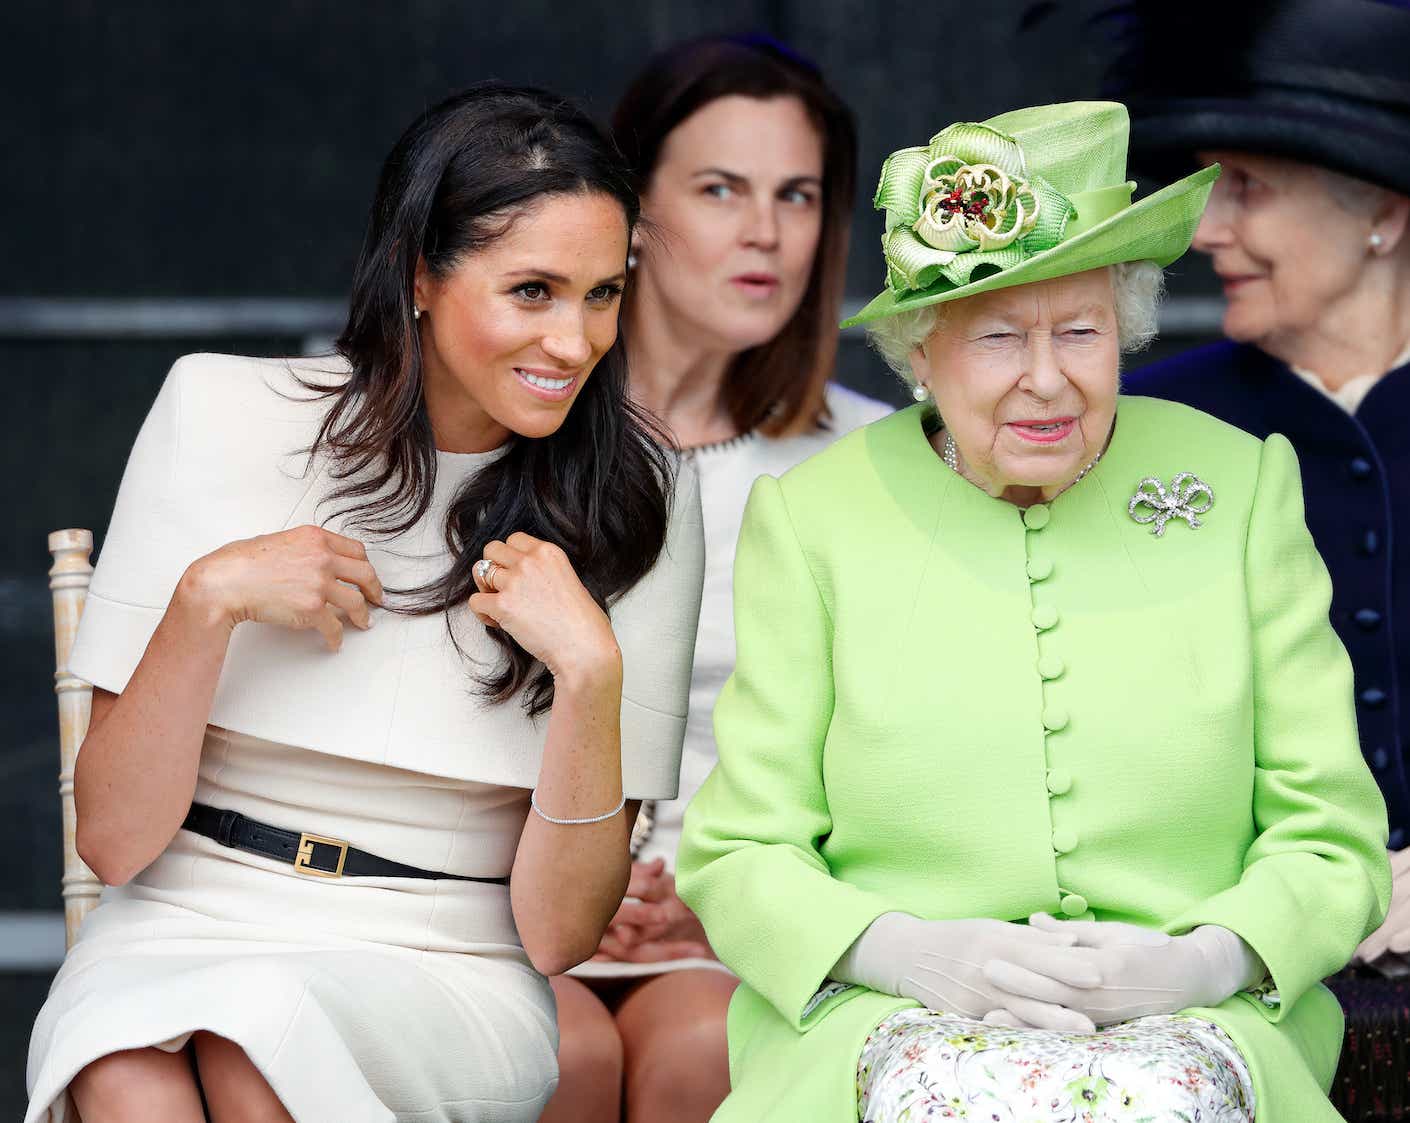 Meghan, Duchess of Sussex and Queen Elizabeth II attend a ceremony to open the new Mersey Gateway Bridge in 2018. The queen wears a bright green suit.